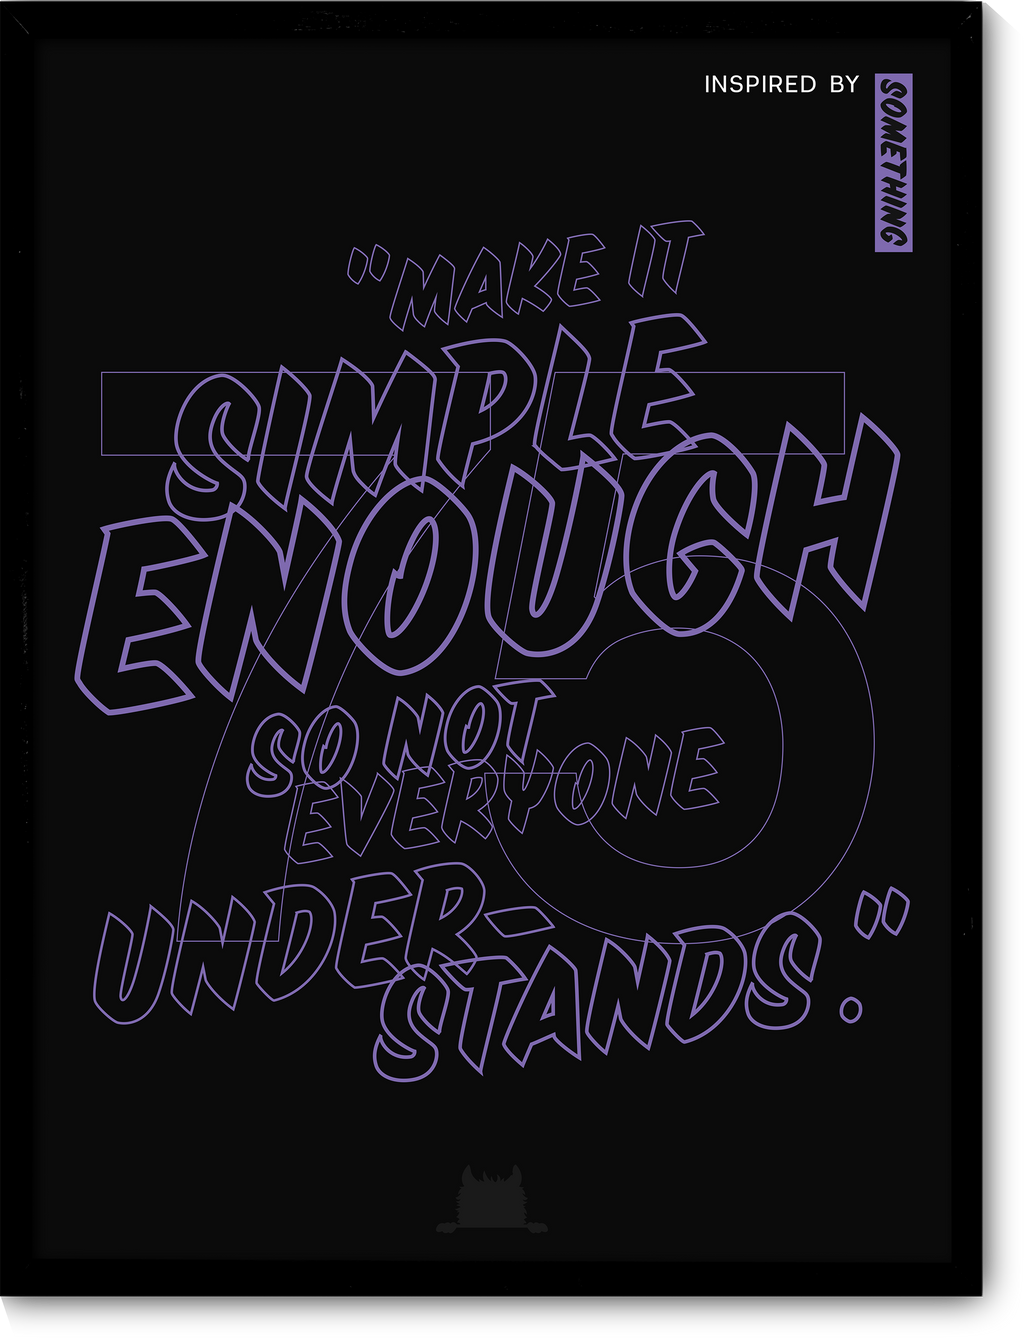 #75 Inspired by a sticker: “Make it simple enough so not everybody understands.”